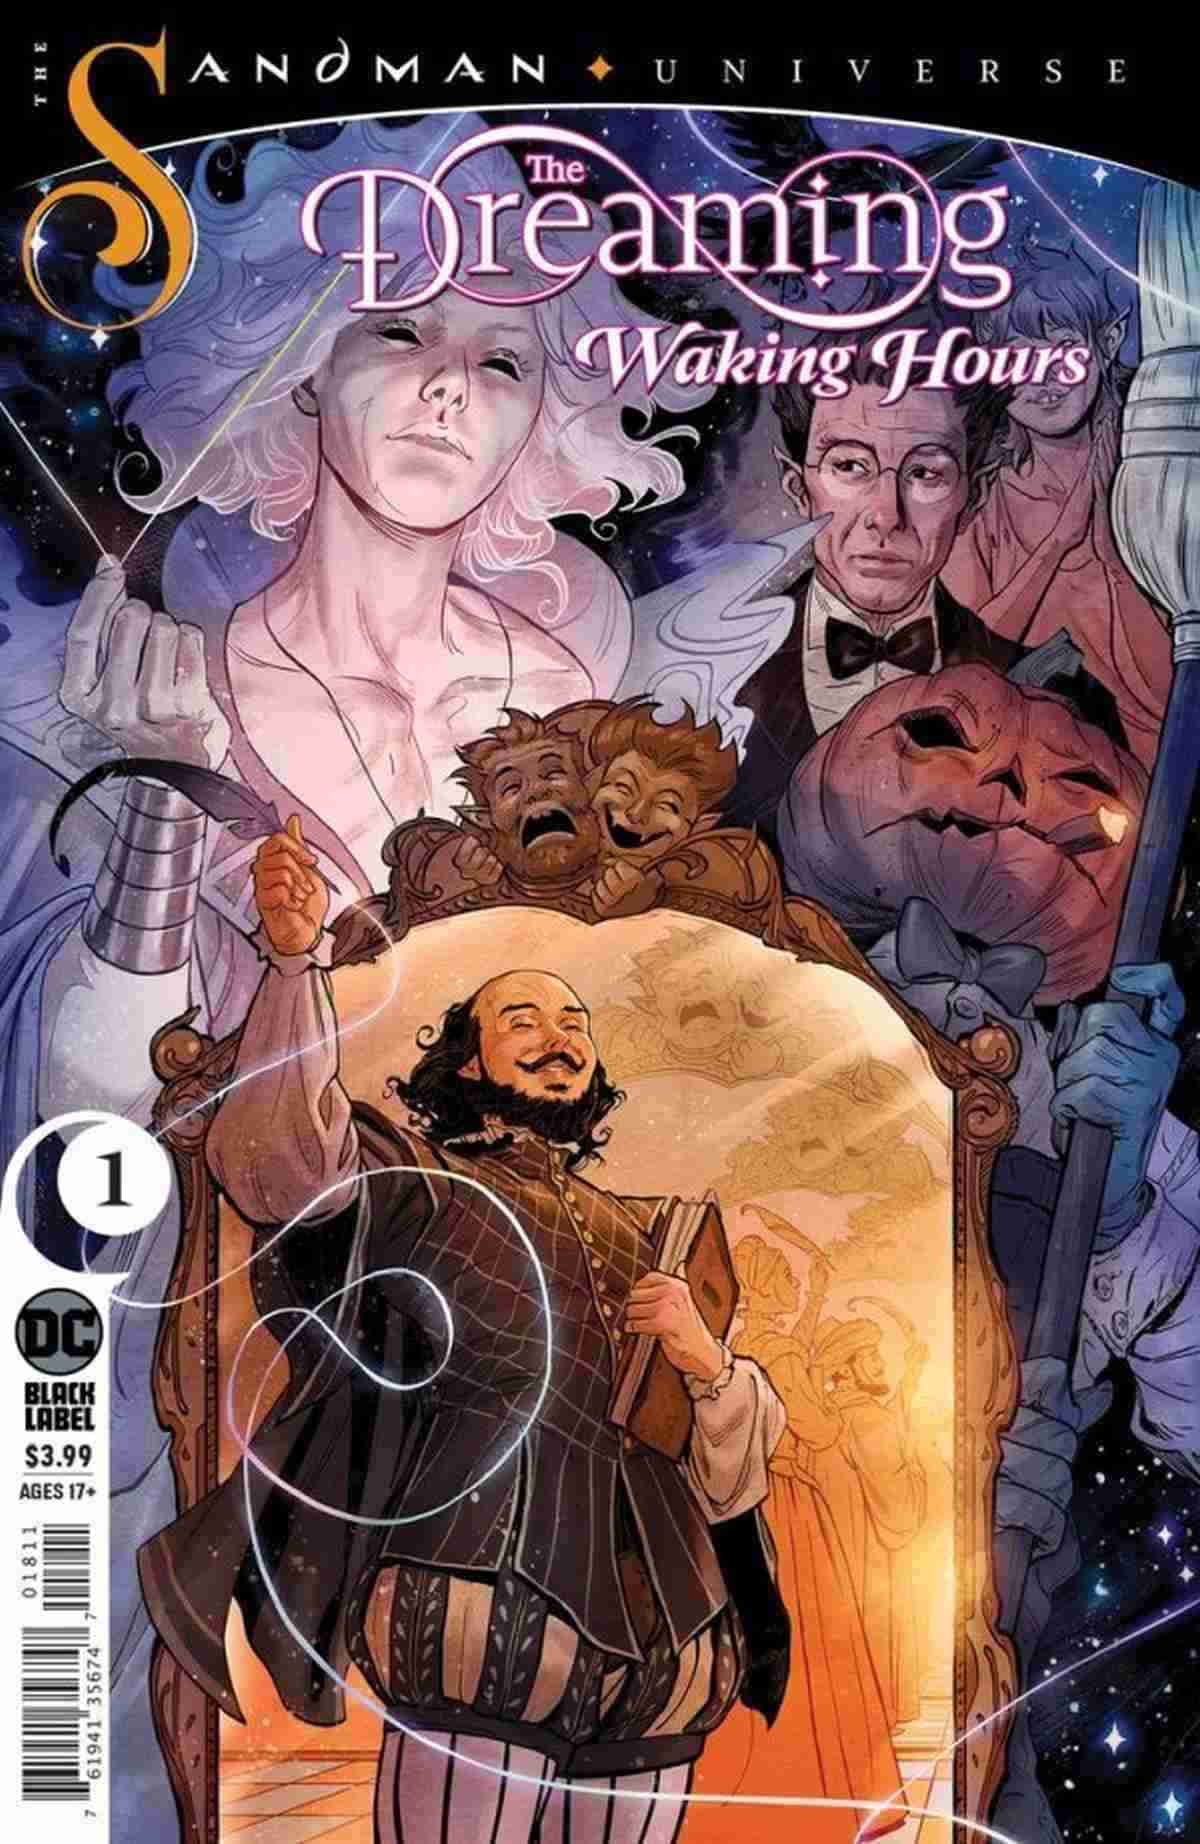 The Dreaming Waking Hours # 1